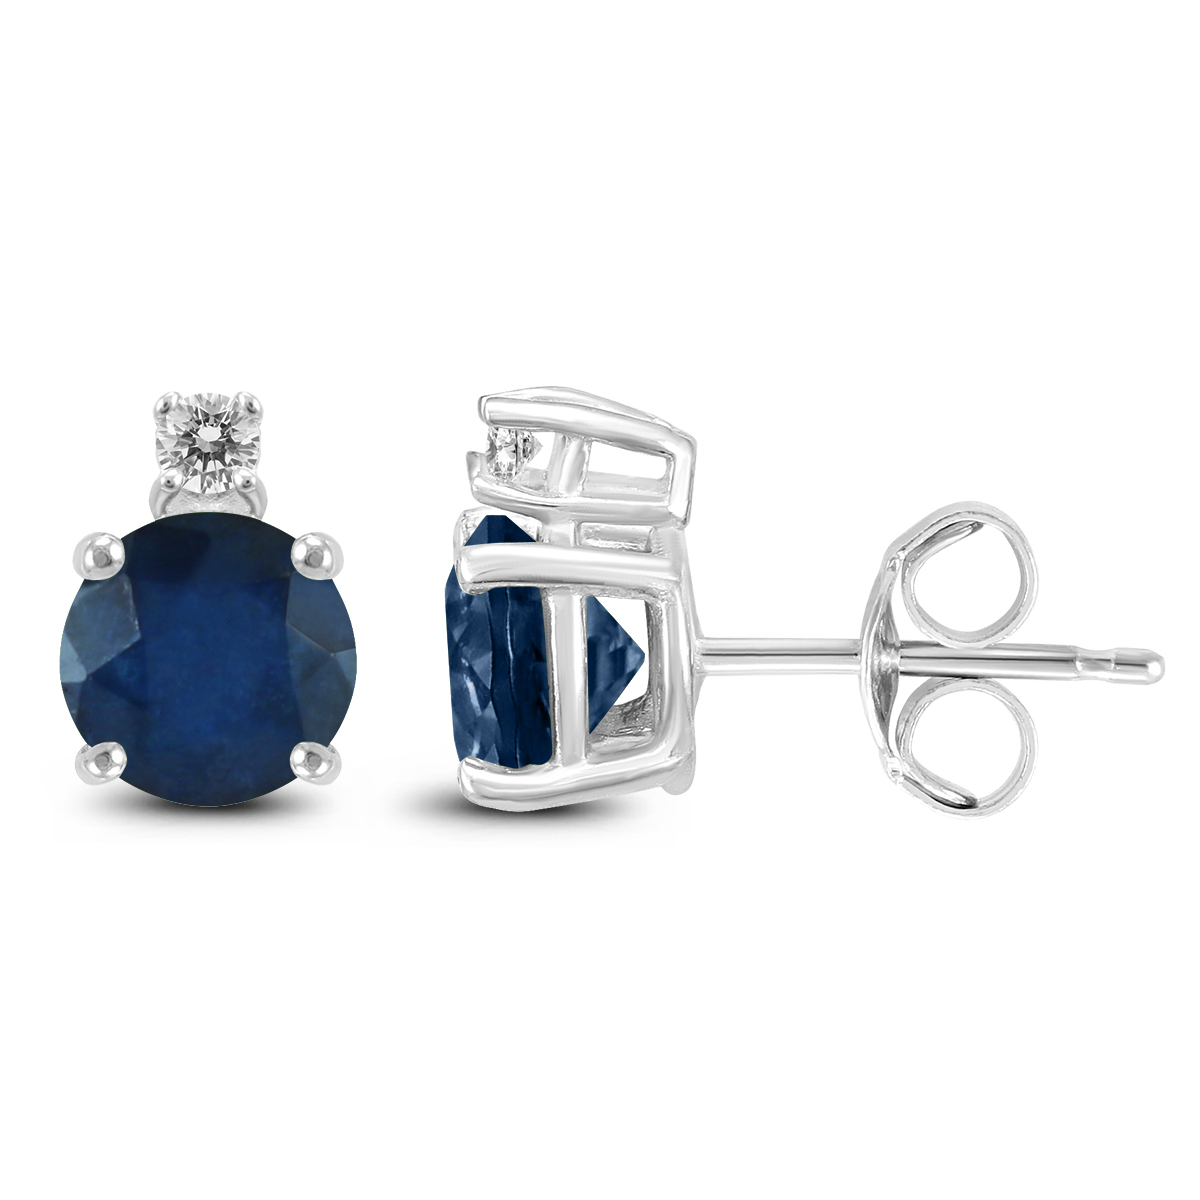 14K White Gold 5MM Round Sapphire and Diamond Earrings